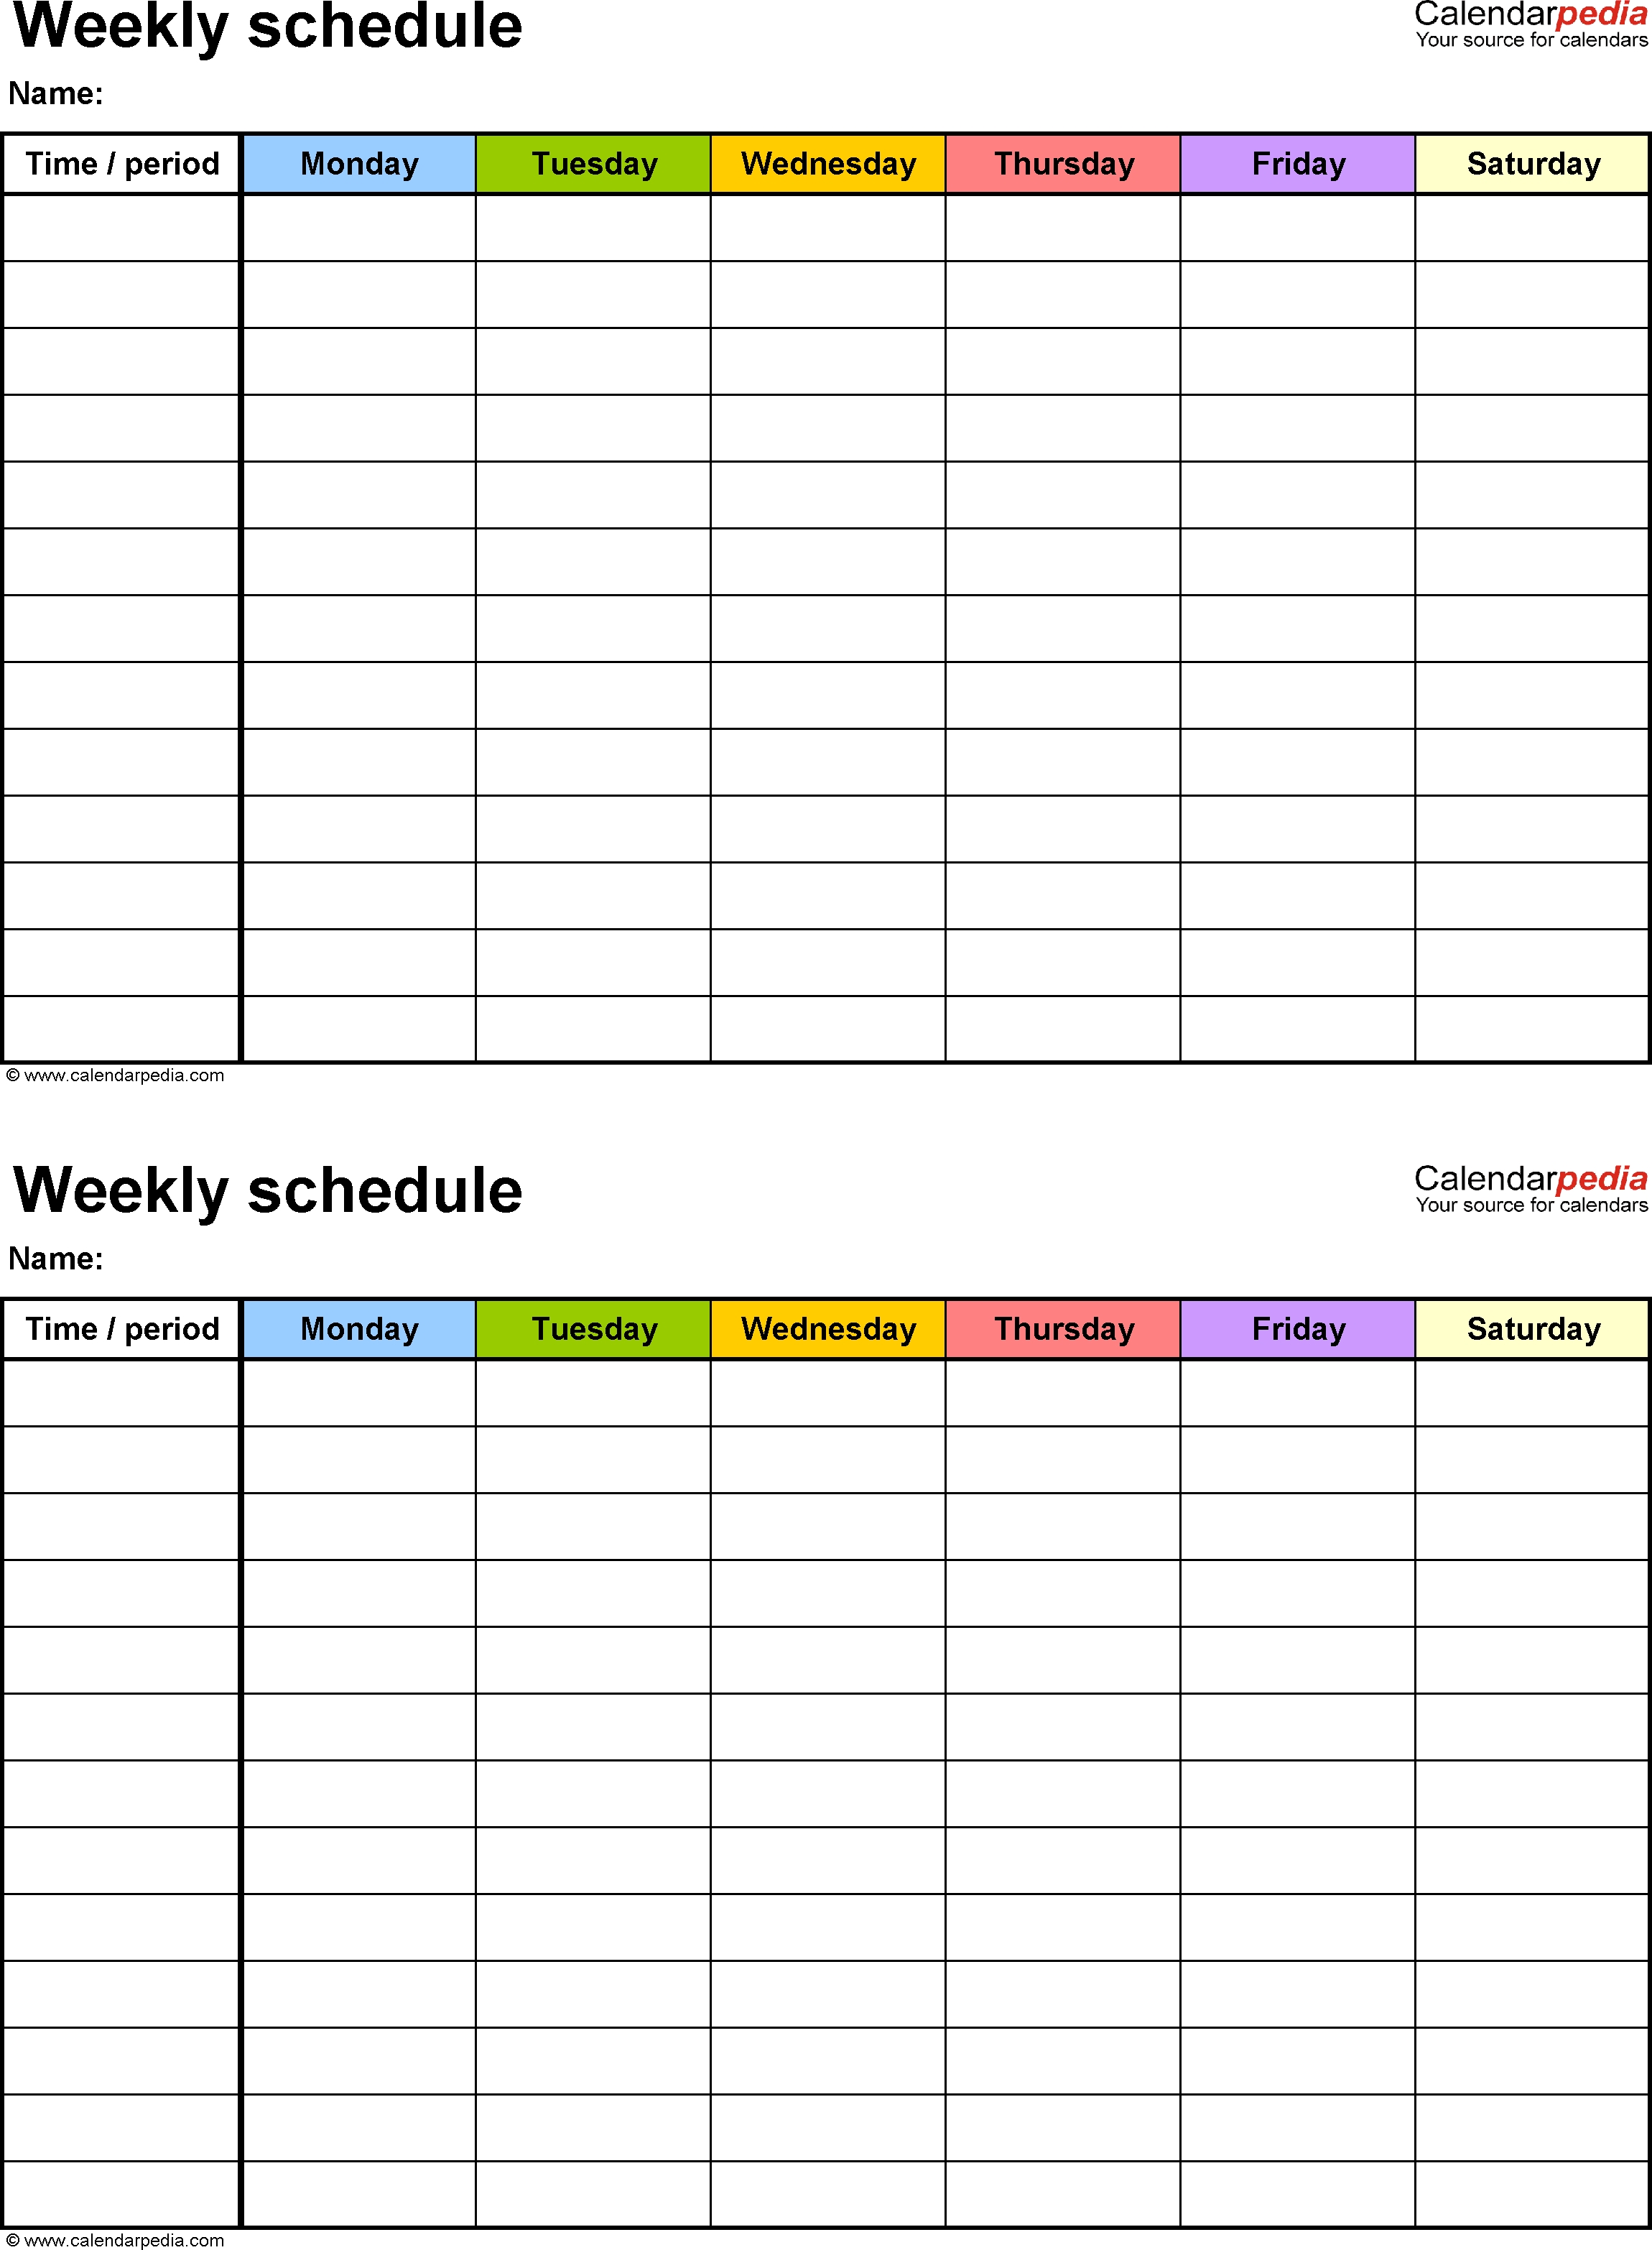 Free Weekly Schedule Templates For Word - 18 Templates  Weekly Schedule Monday Through Friday